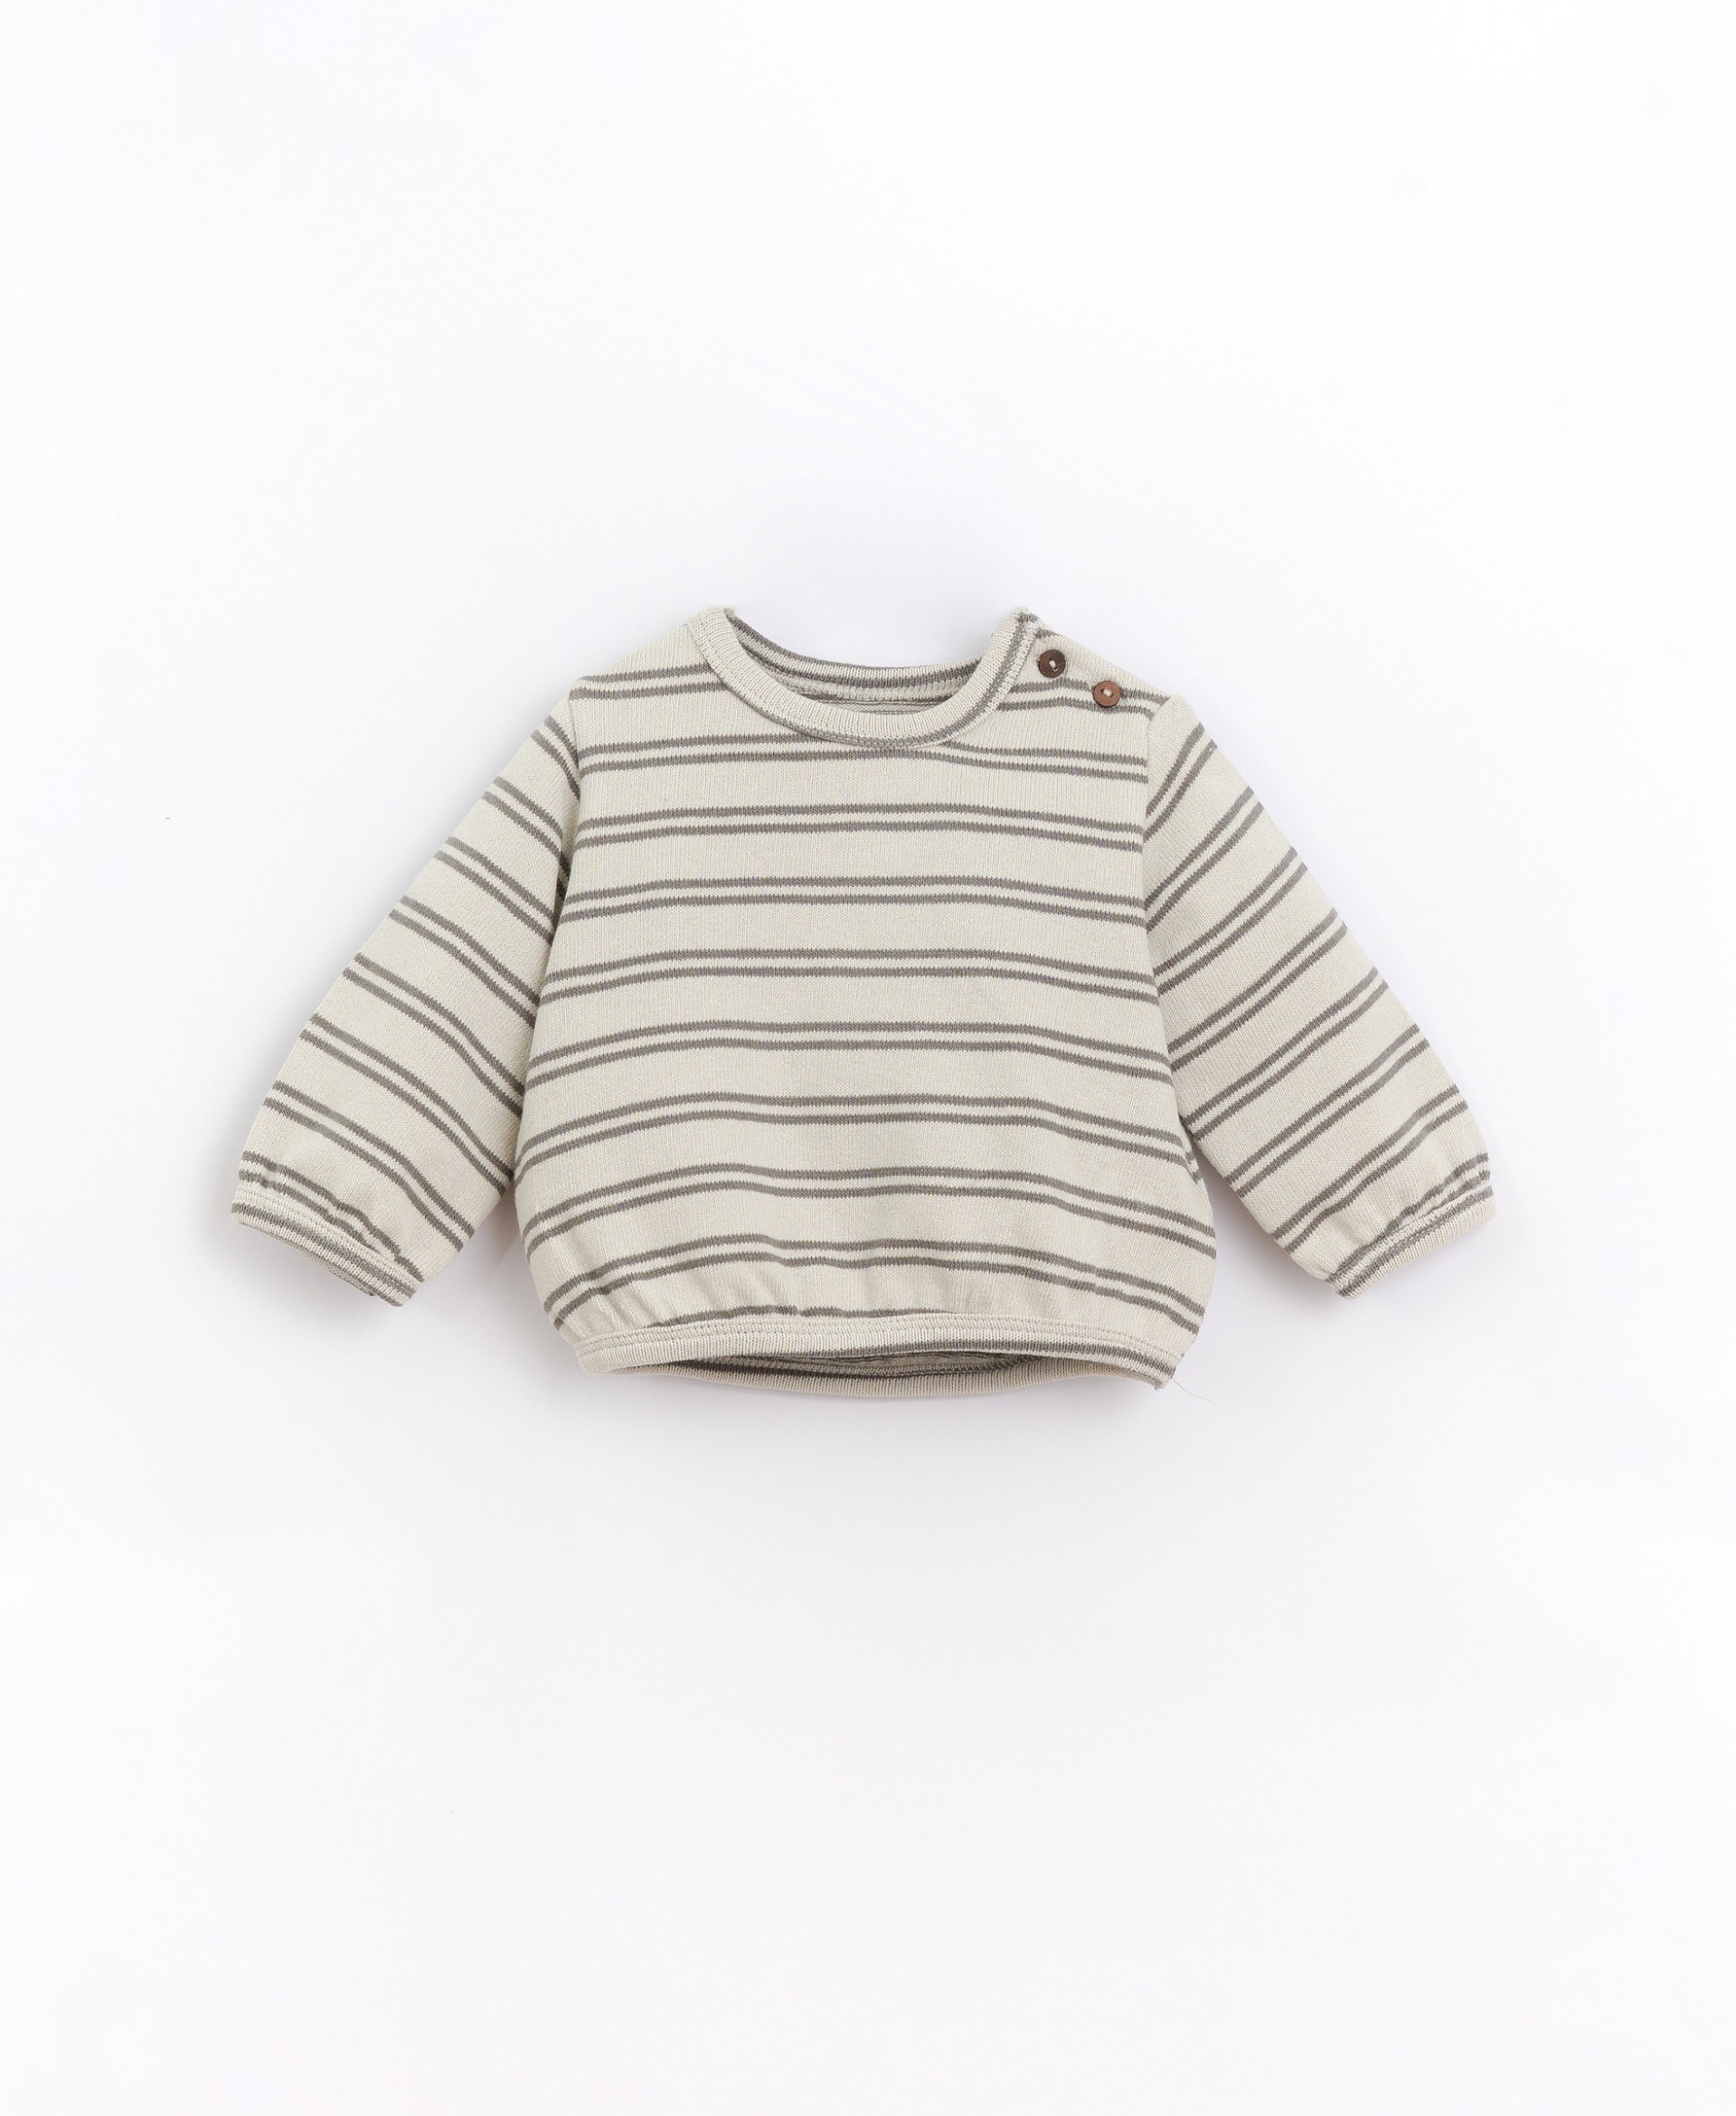 Striped sweater in recycled fibers | Basketry